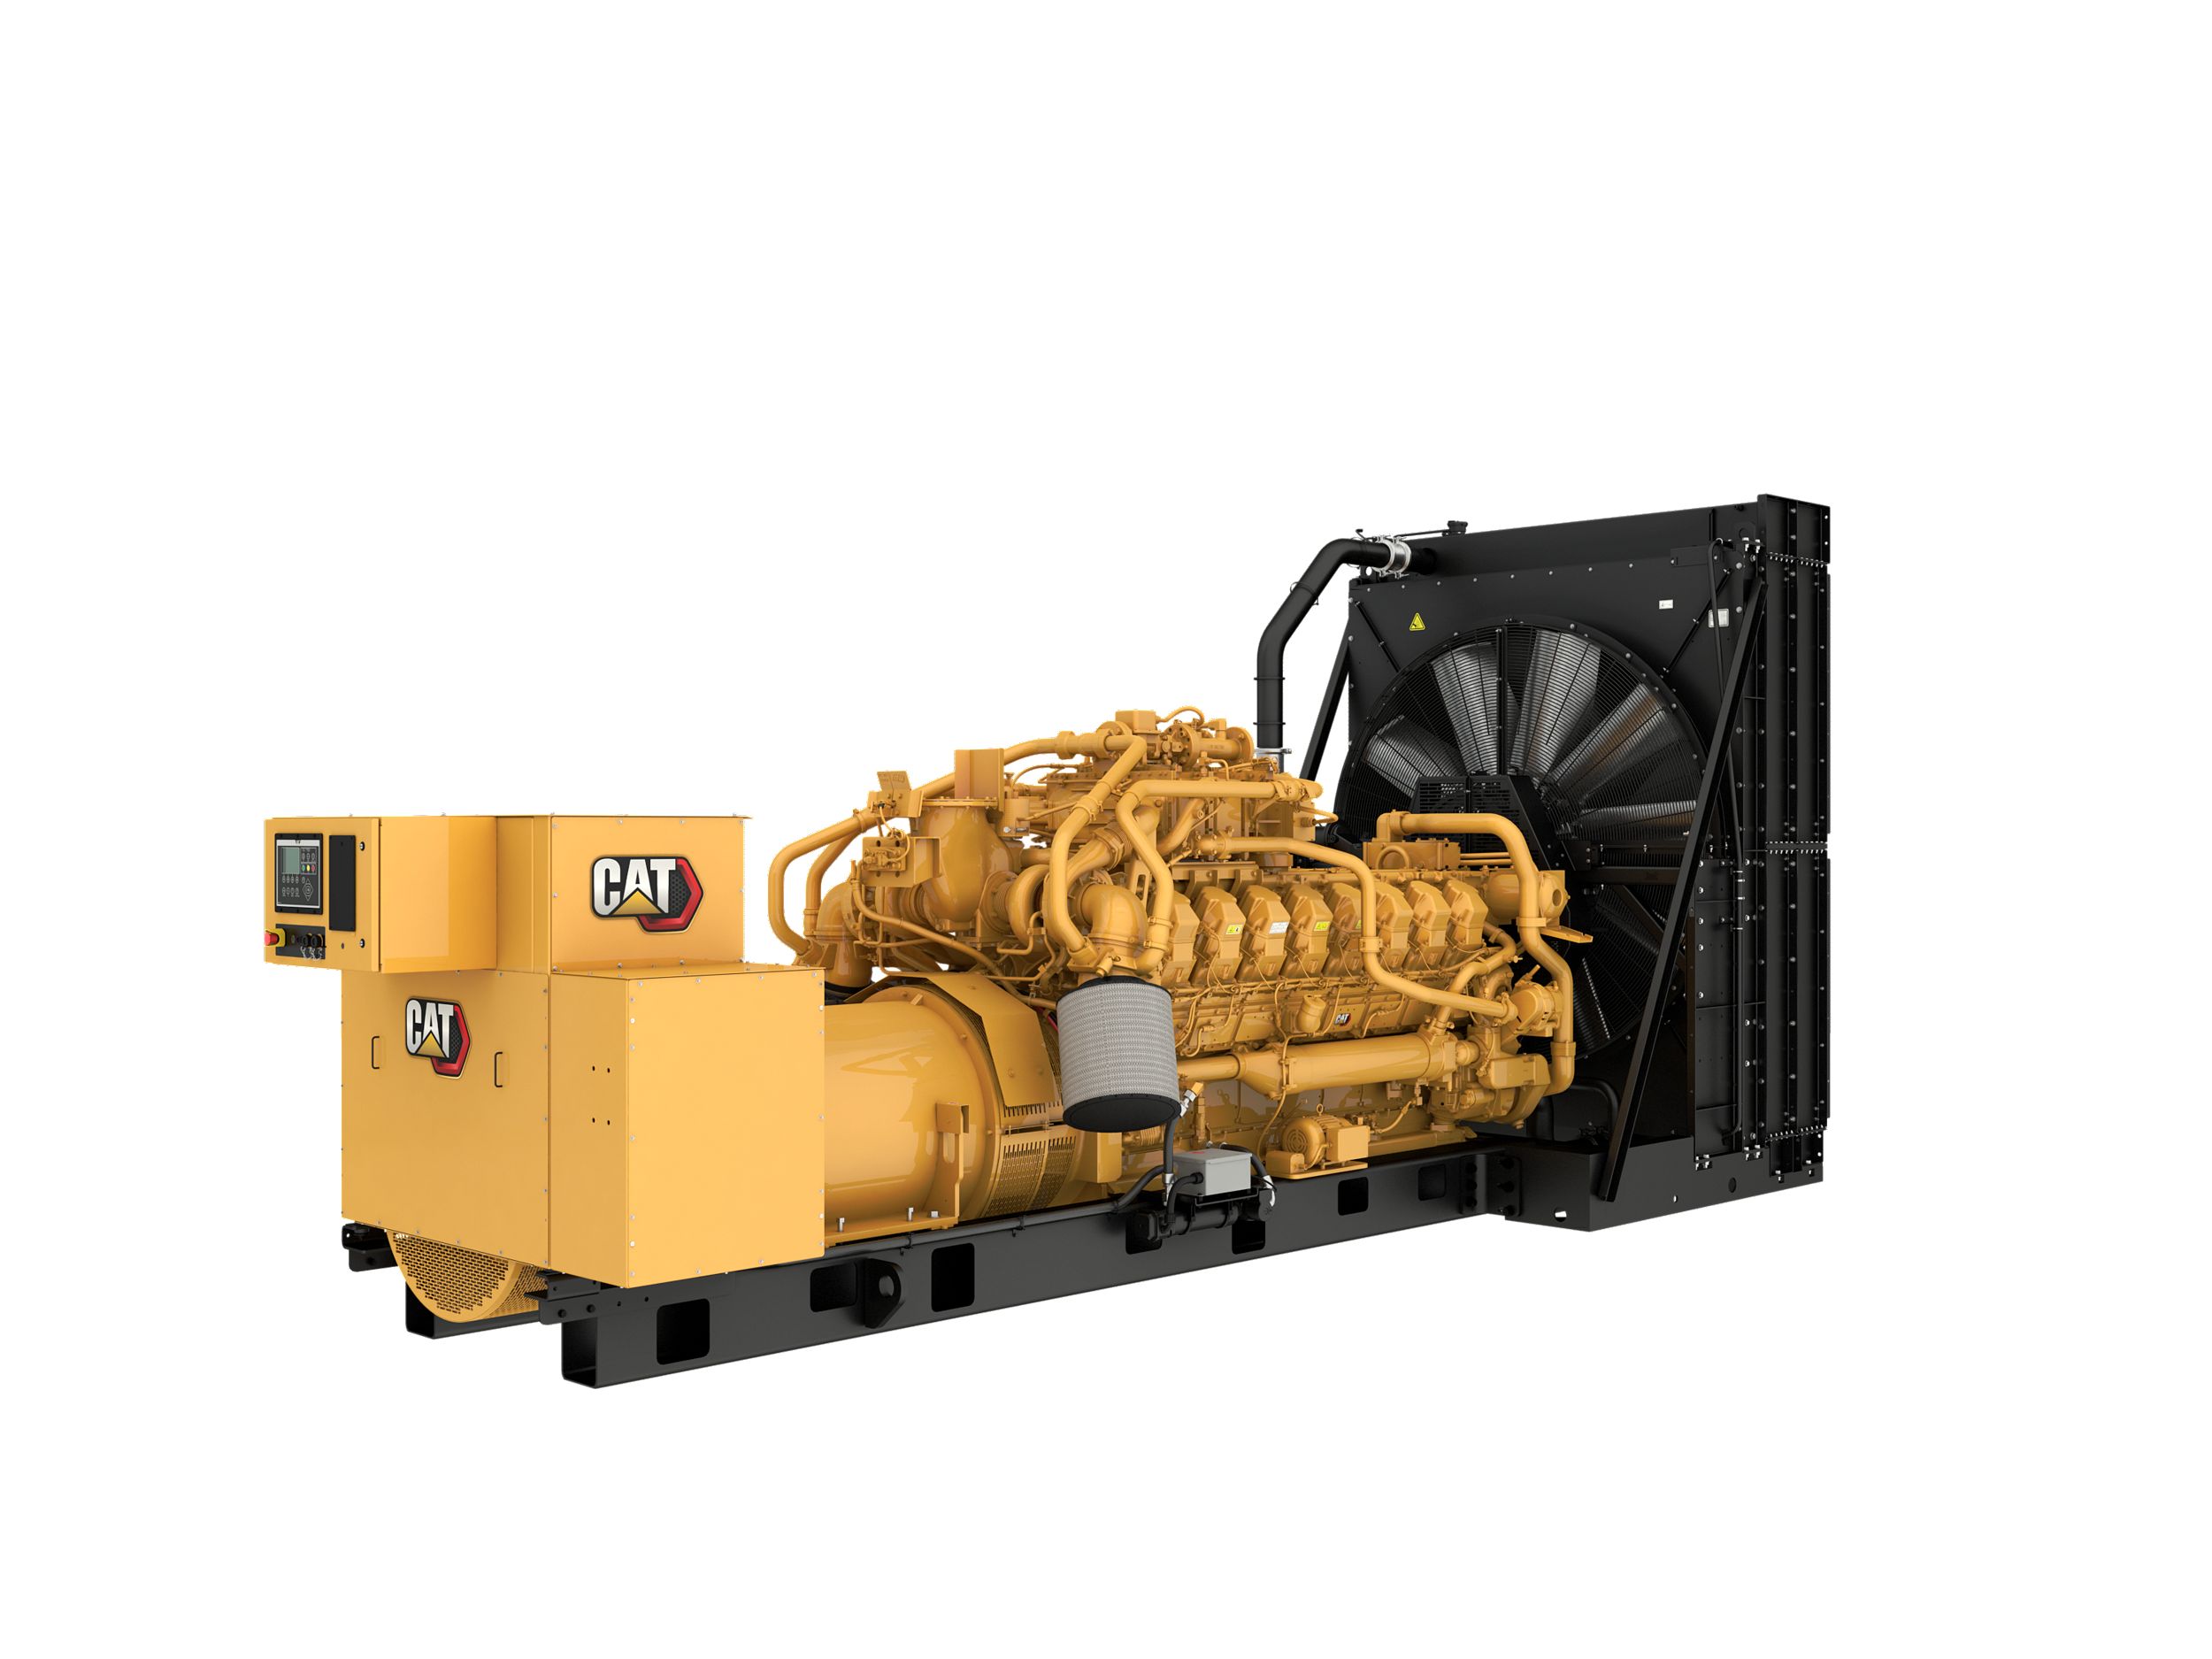 G3516 Gas Generator Set Rear Right View